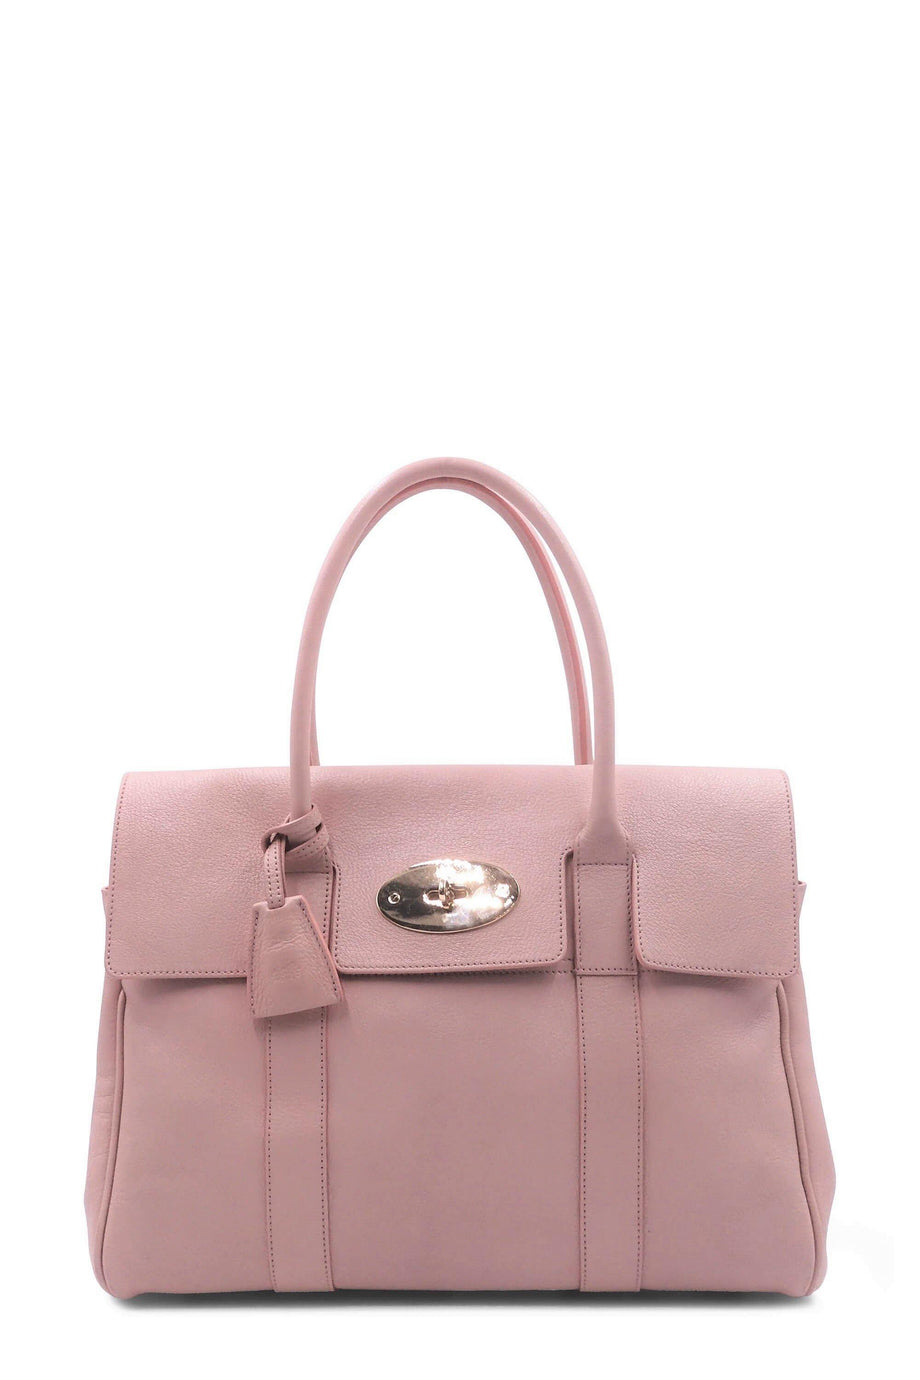 Mulberry - a Bayswater pink soft grain leather hand bag, flap closure, with  gold tone postman's lock and hardware, one central compartment, rolled  leather top handles, adjustable side straps, size approx. 26mm